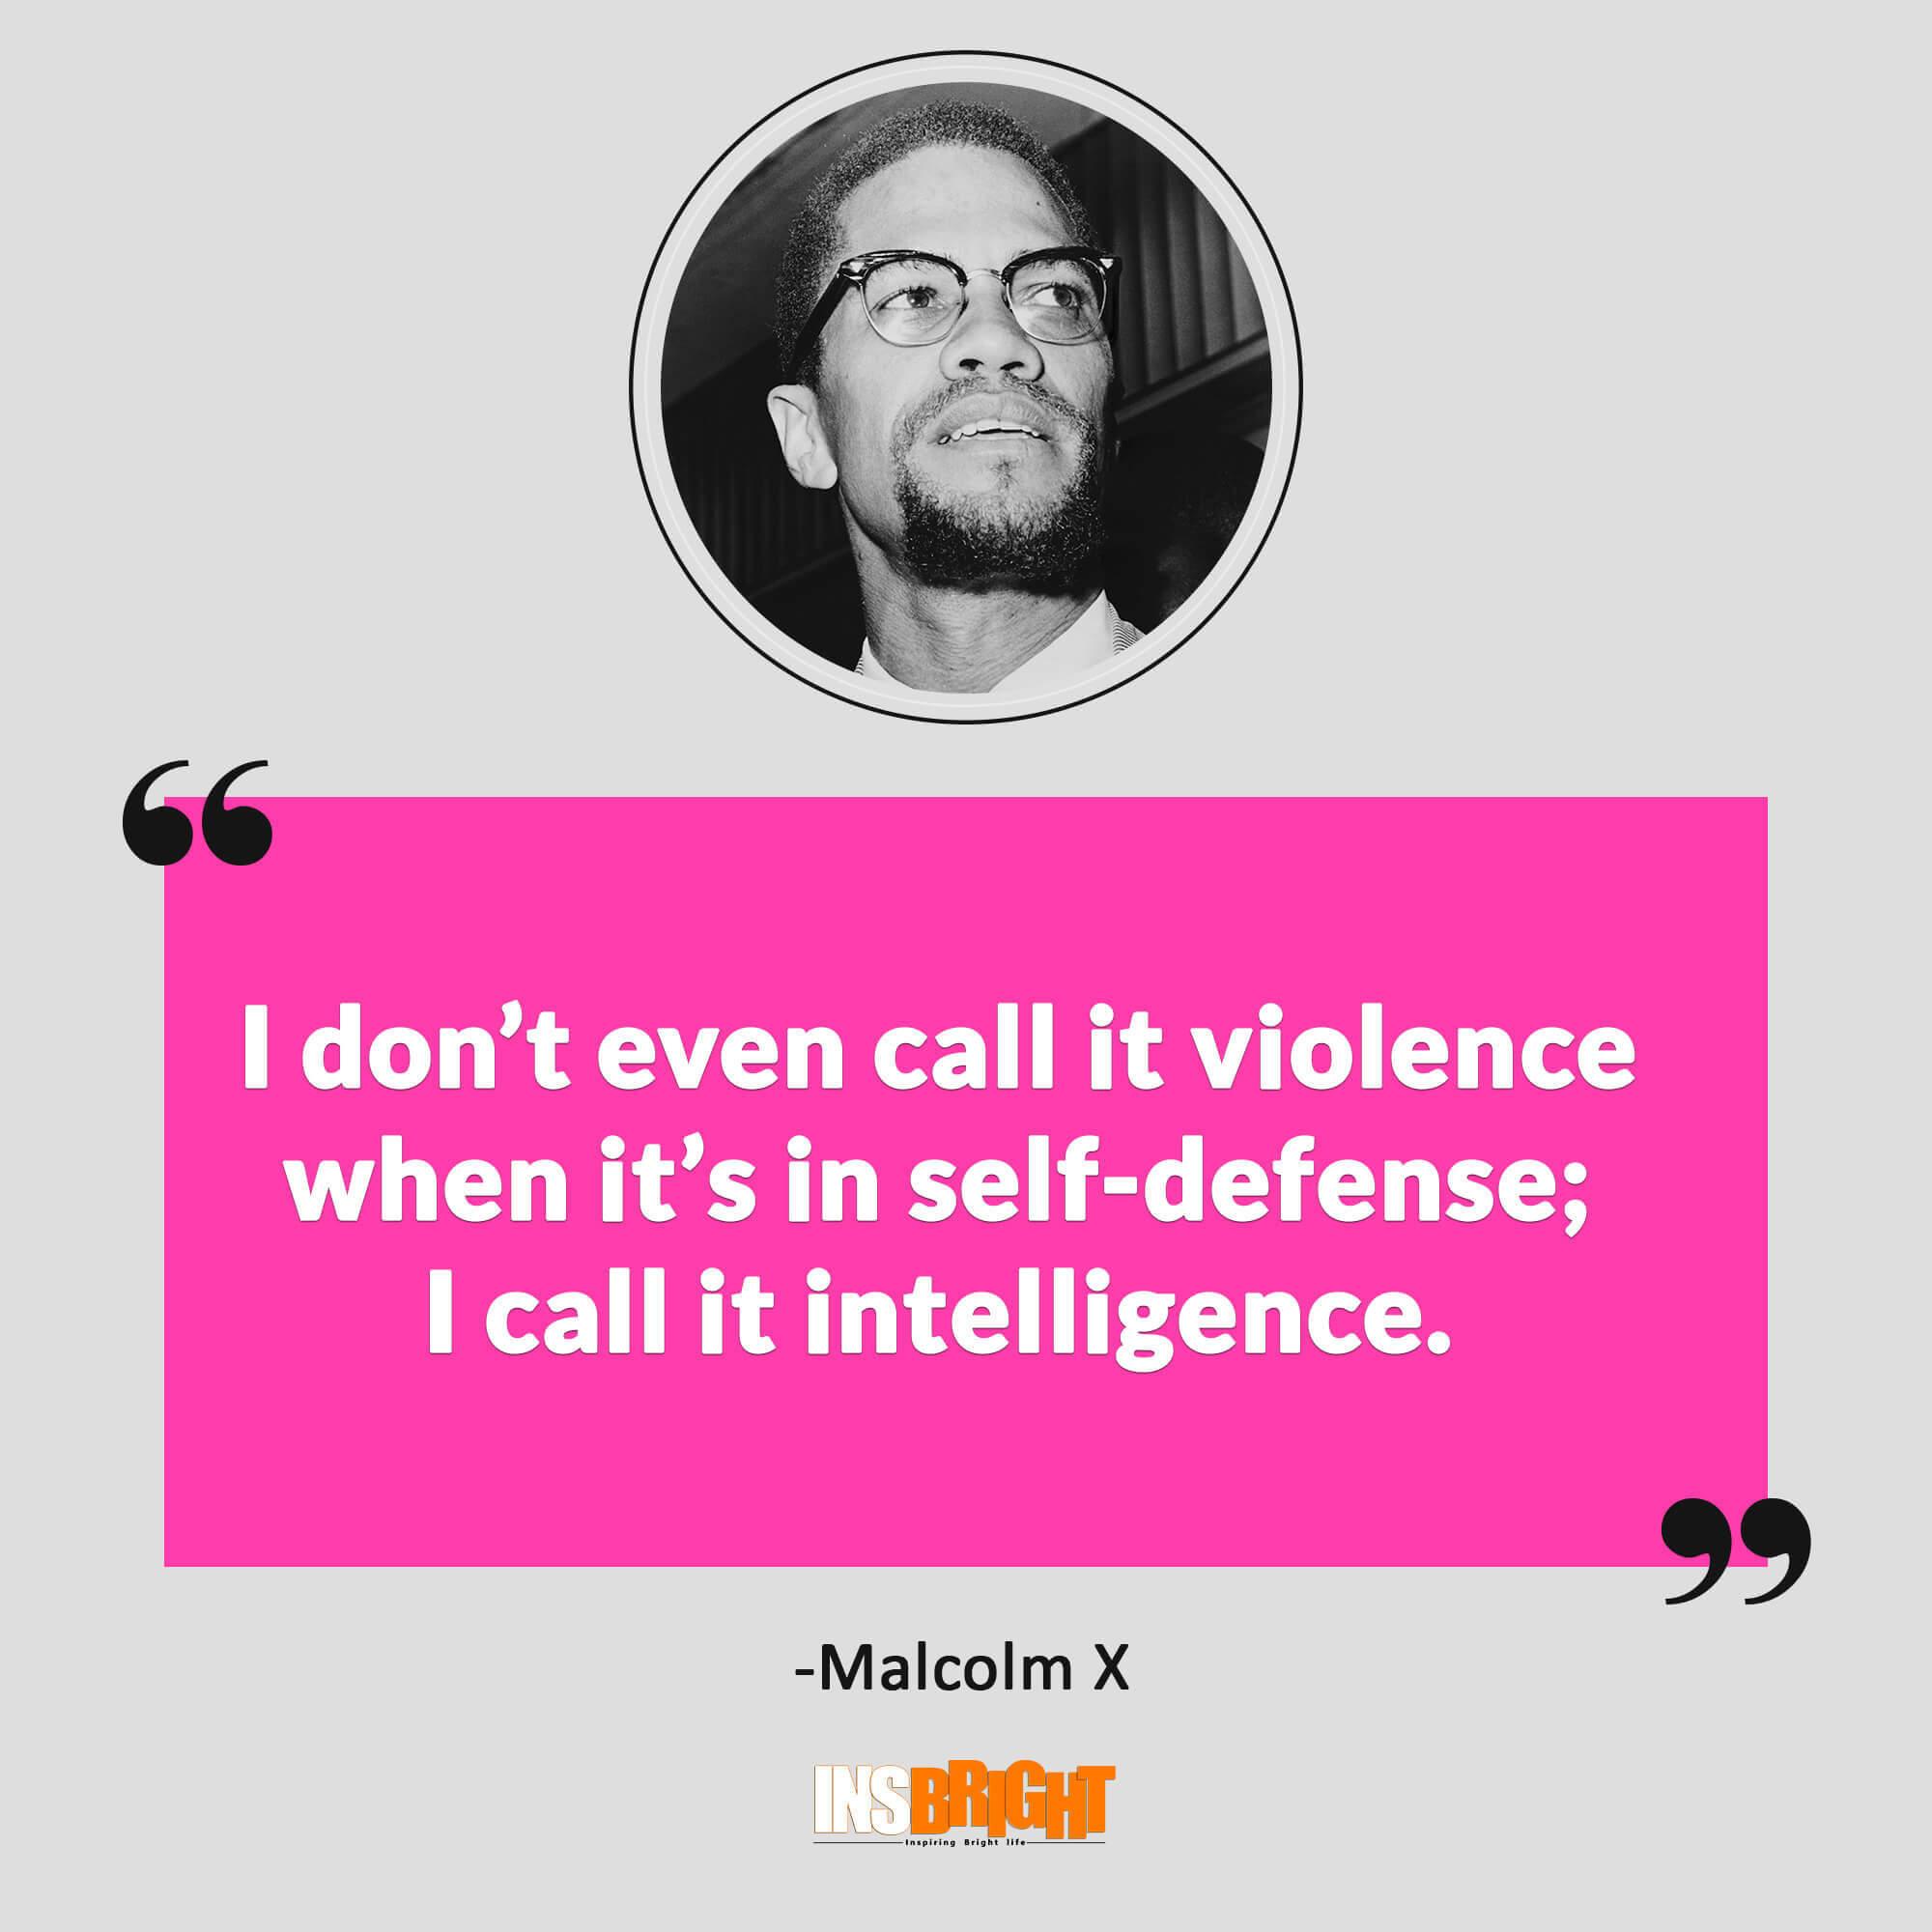 Famous Malcolm X Quotes With Image. Short Malcolm X Greatest